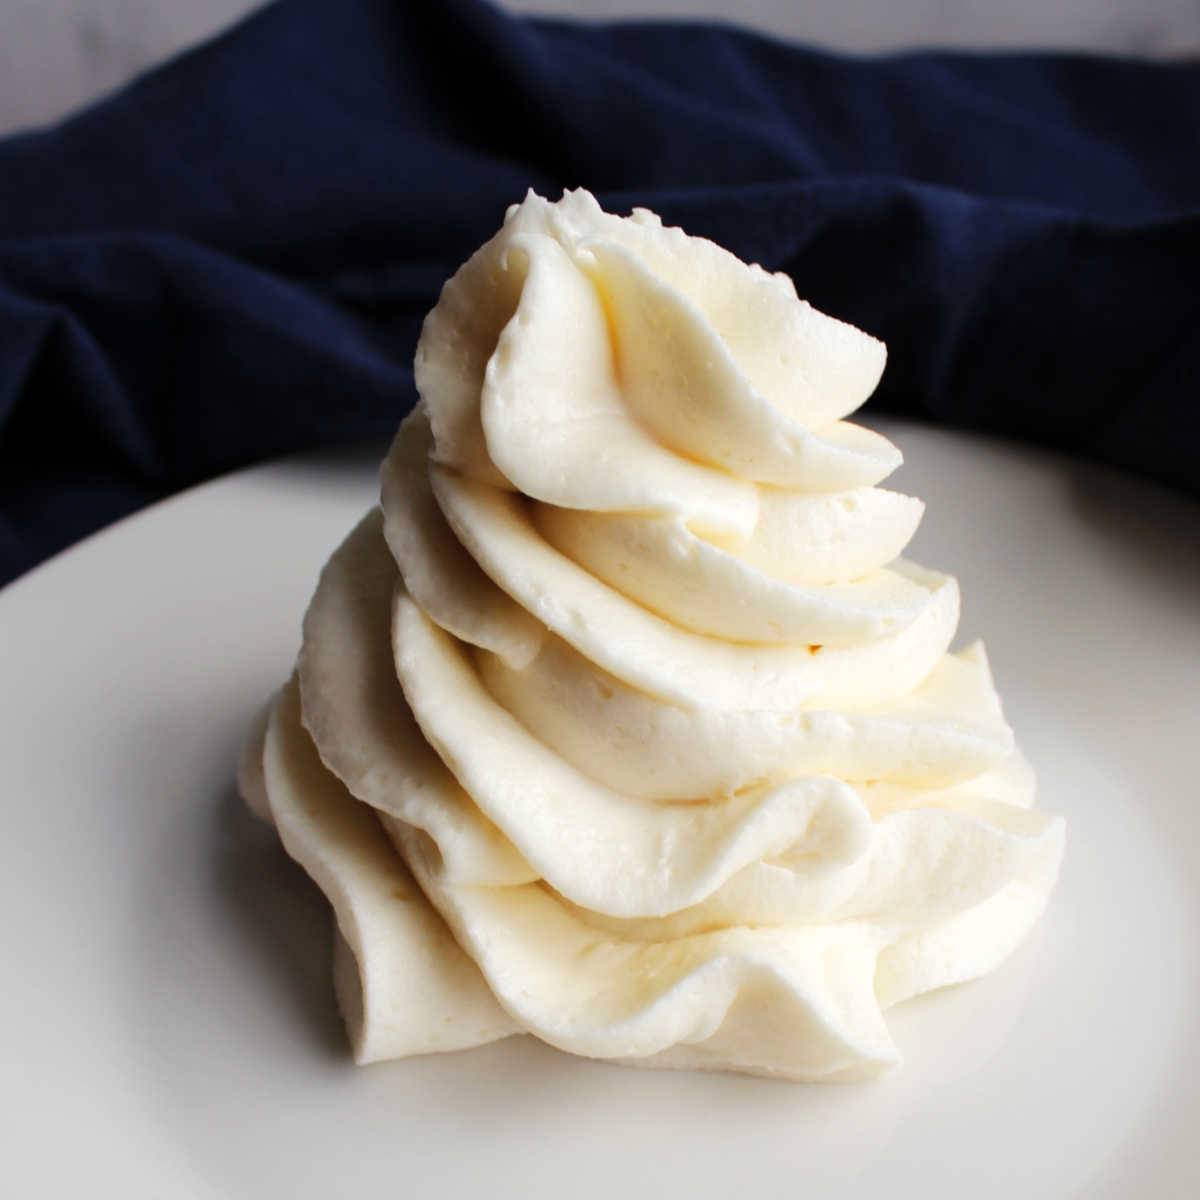 Piped swirl of fluffy cream cheese ermine frosting.